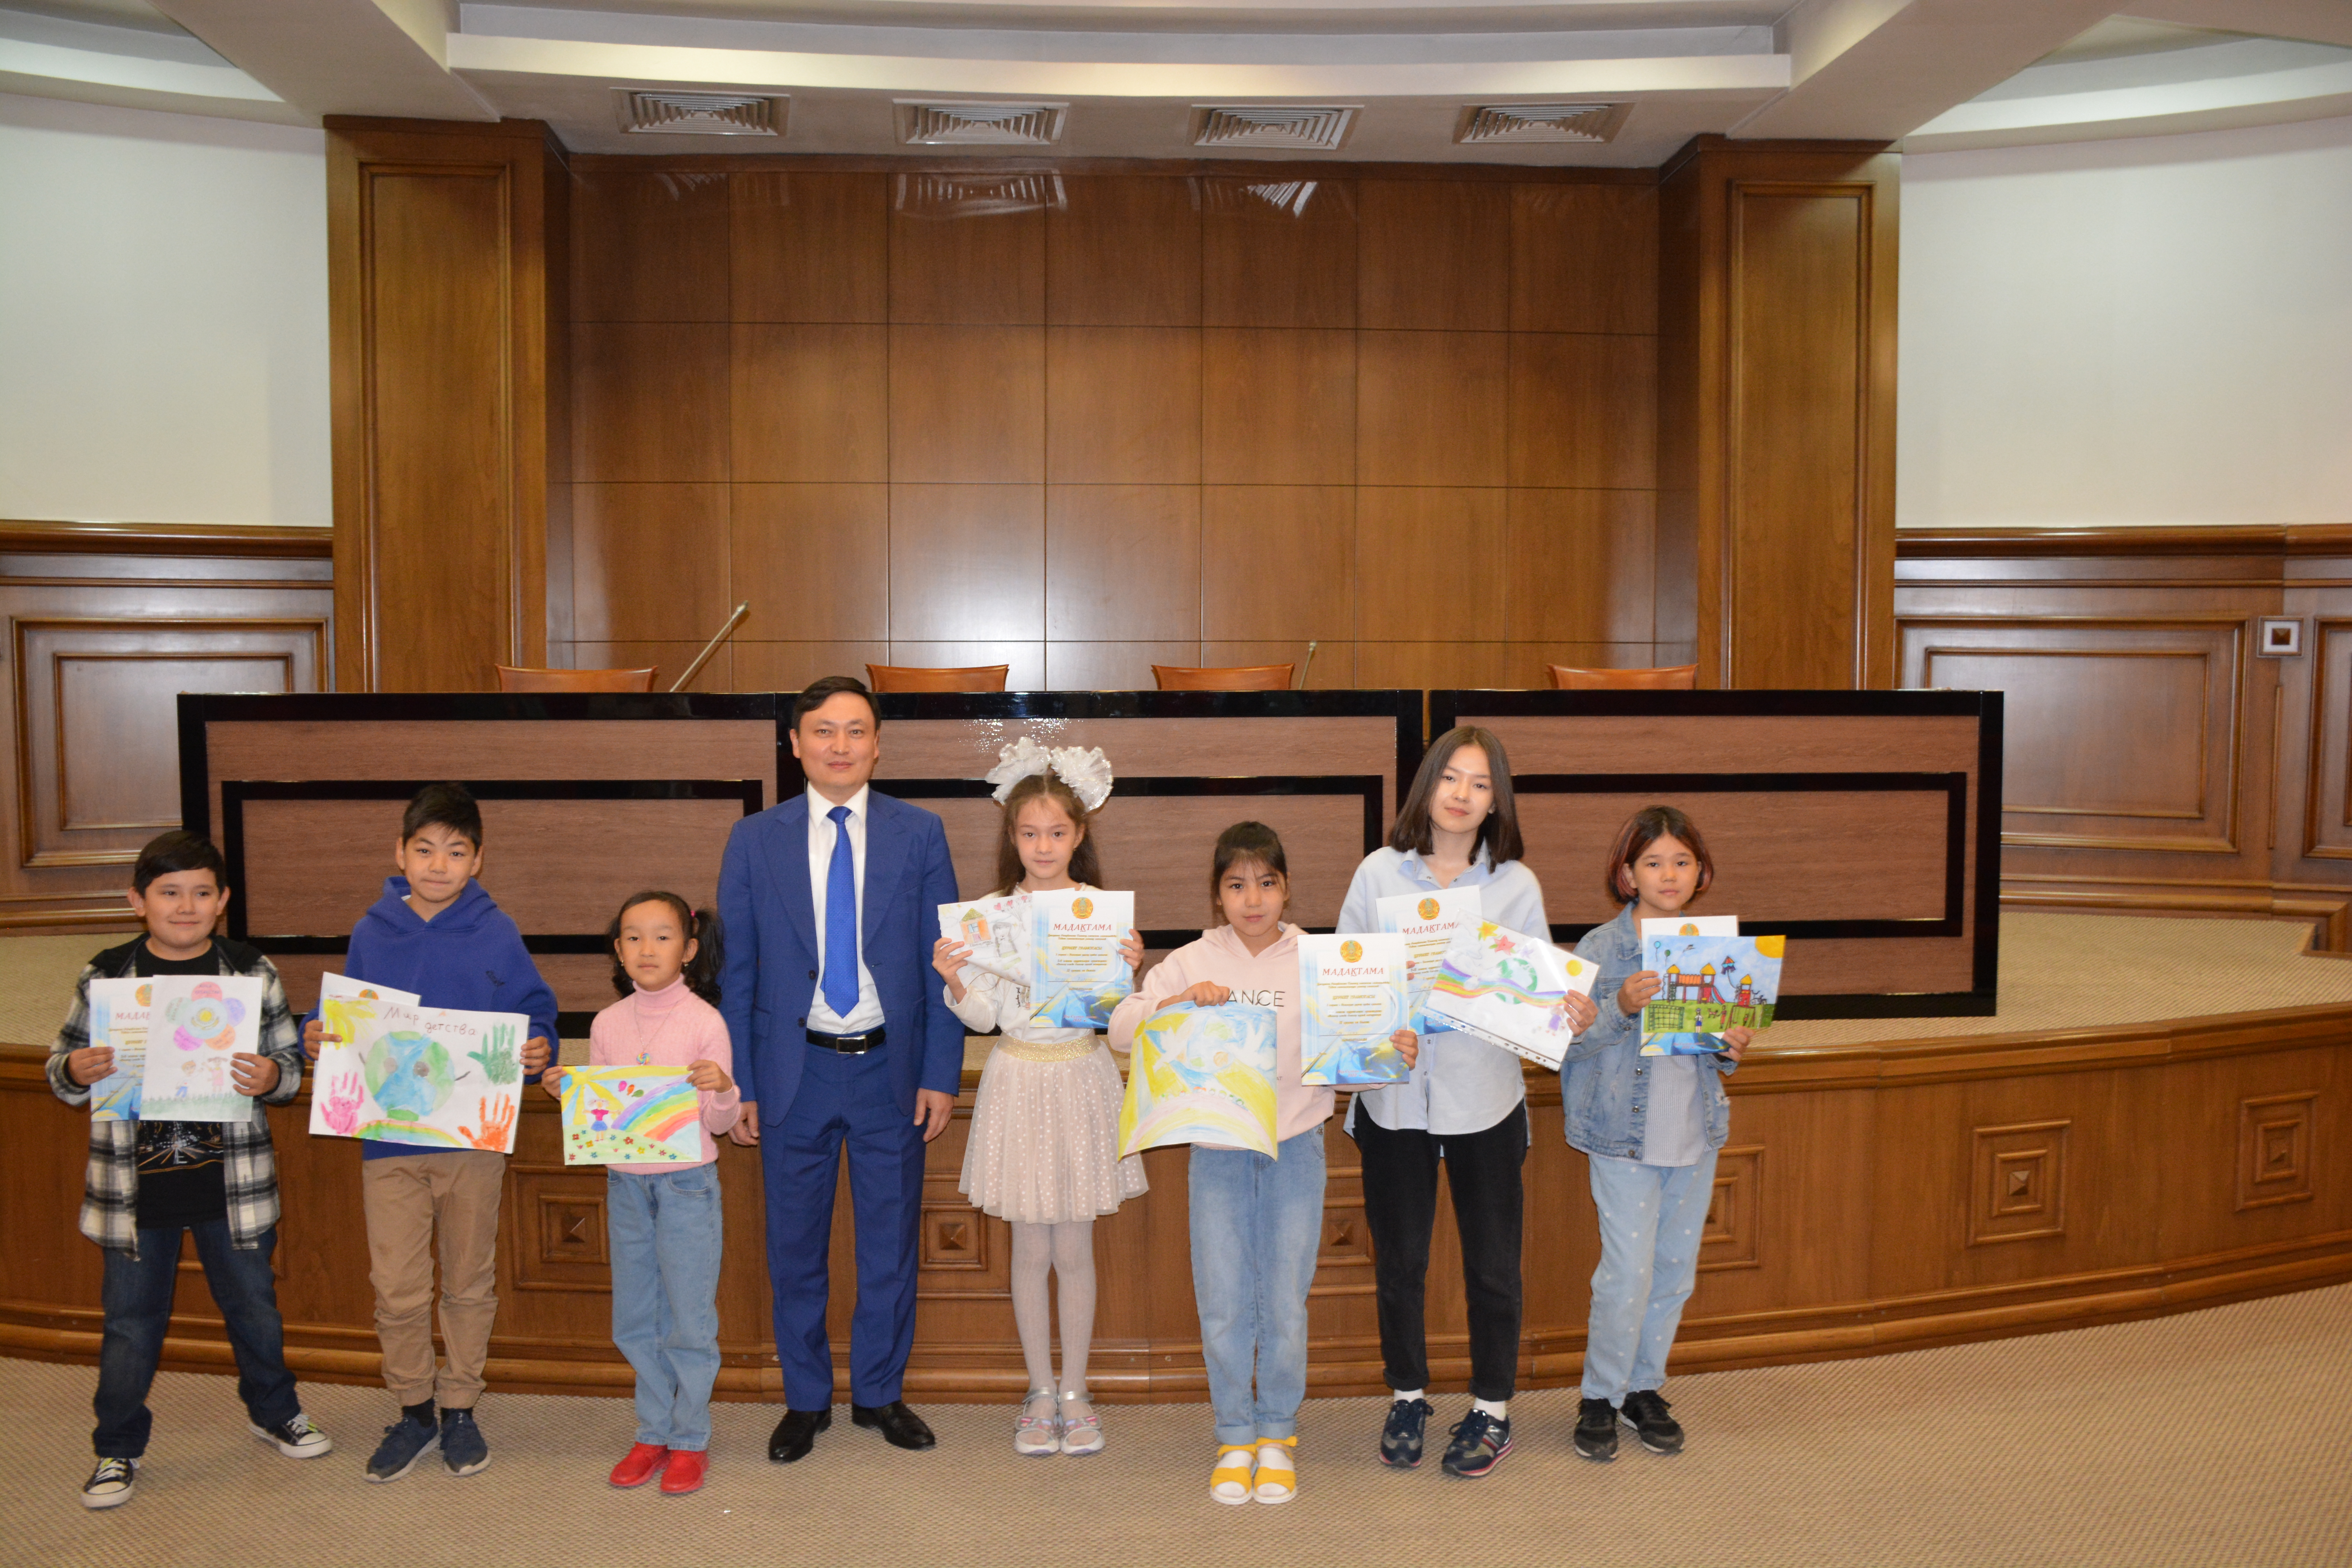 The Committee on Regulation of Natural monopolies congratulated on the Children's Day